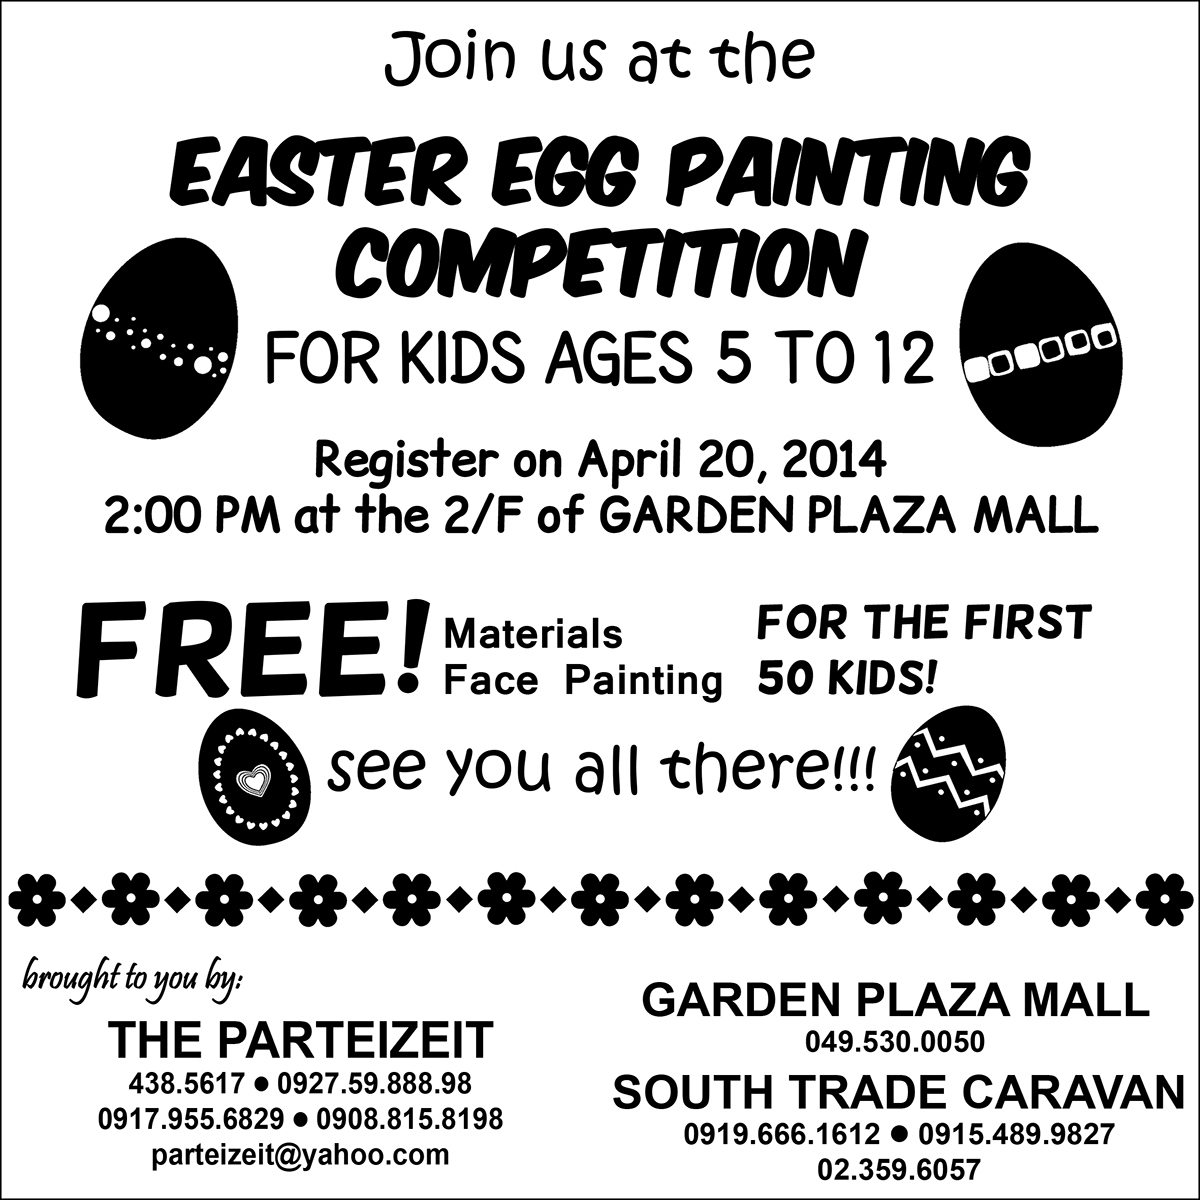 garden plaza mall advertisement event ad easter egg painting Competition